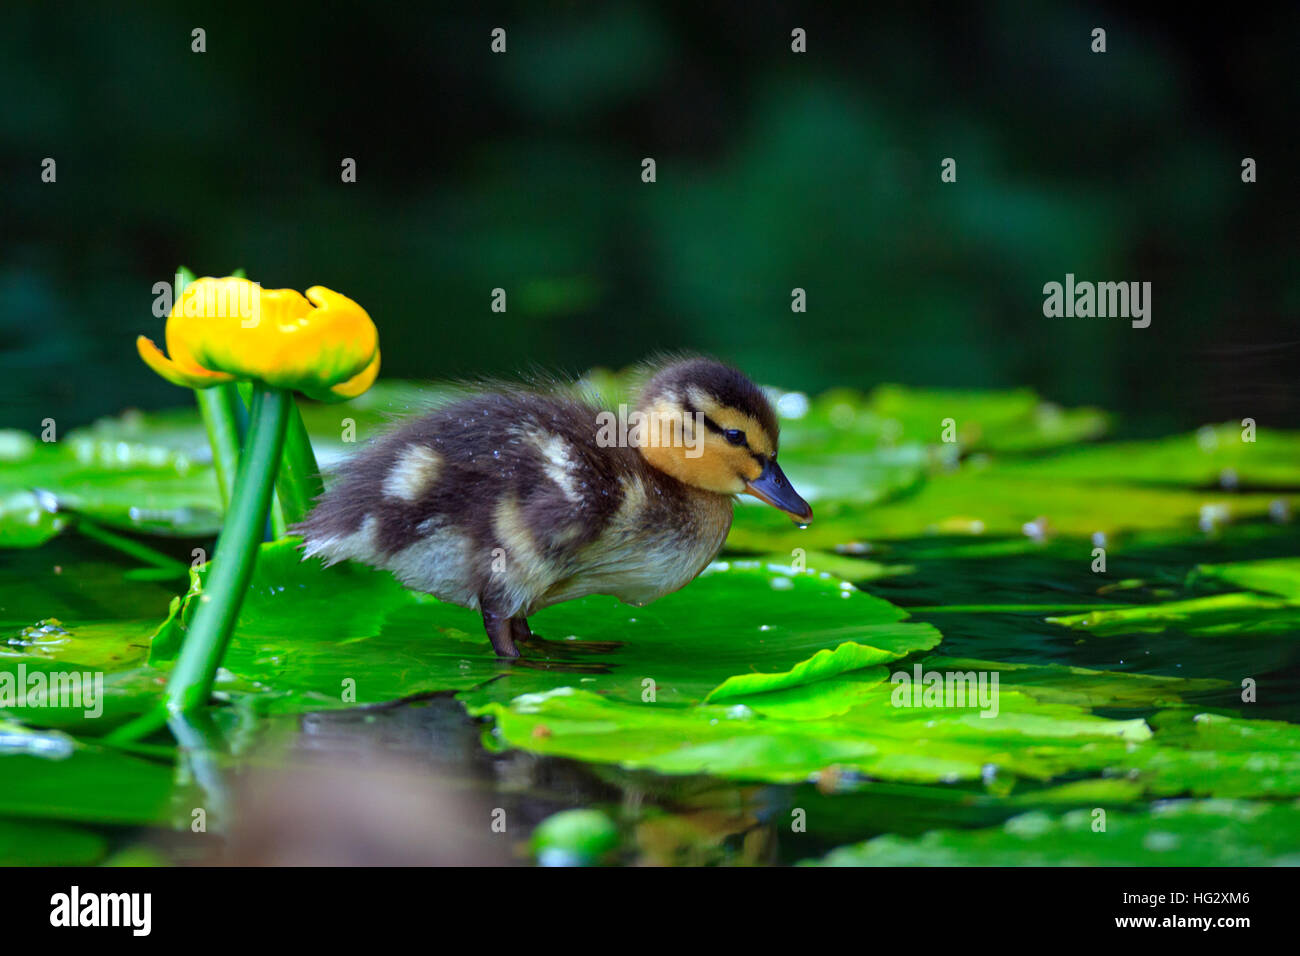 Very young fluffy and curious duckling exploring its pond environment. Good calendar image. Stock Photo